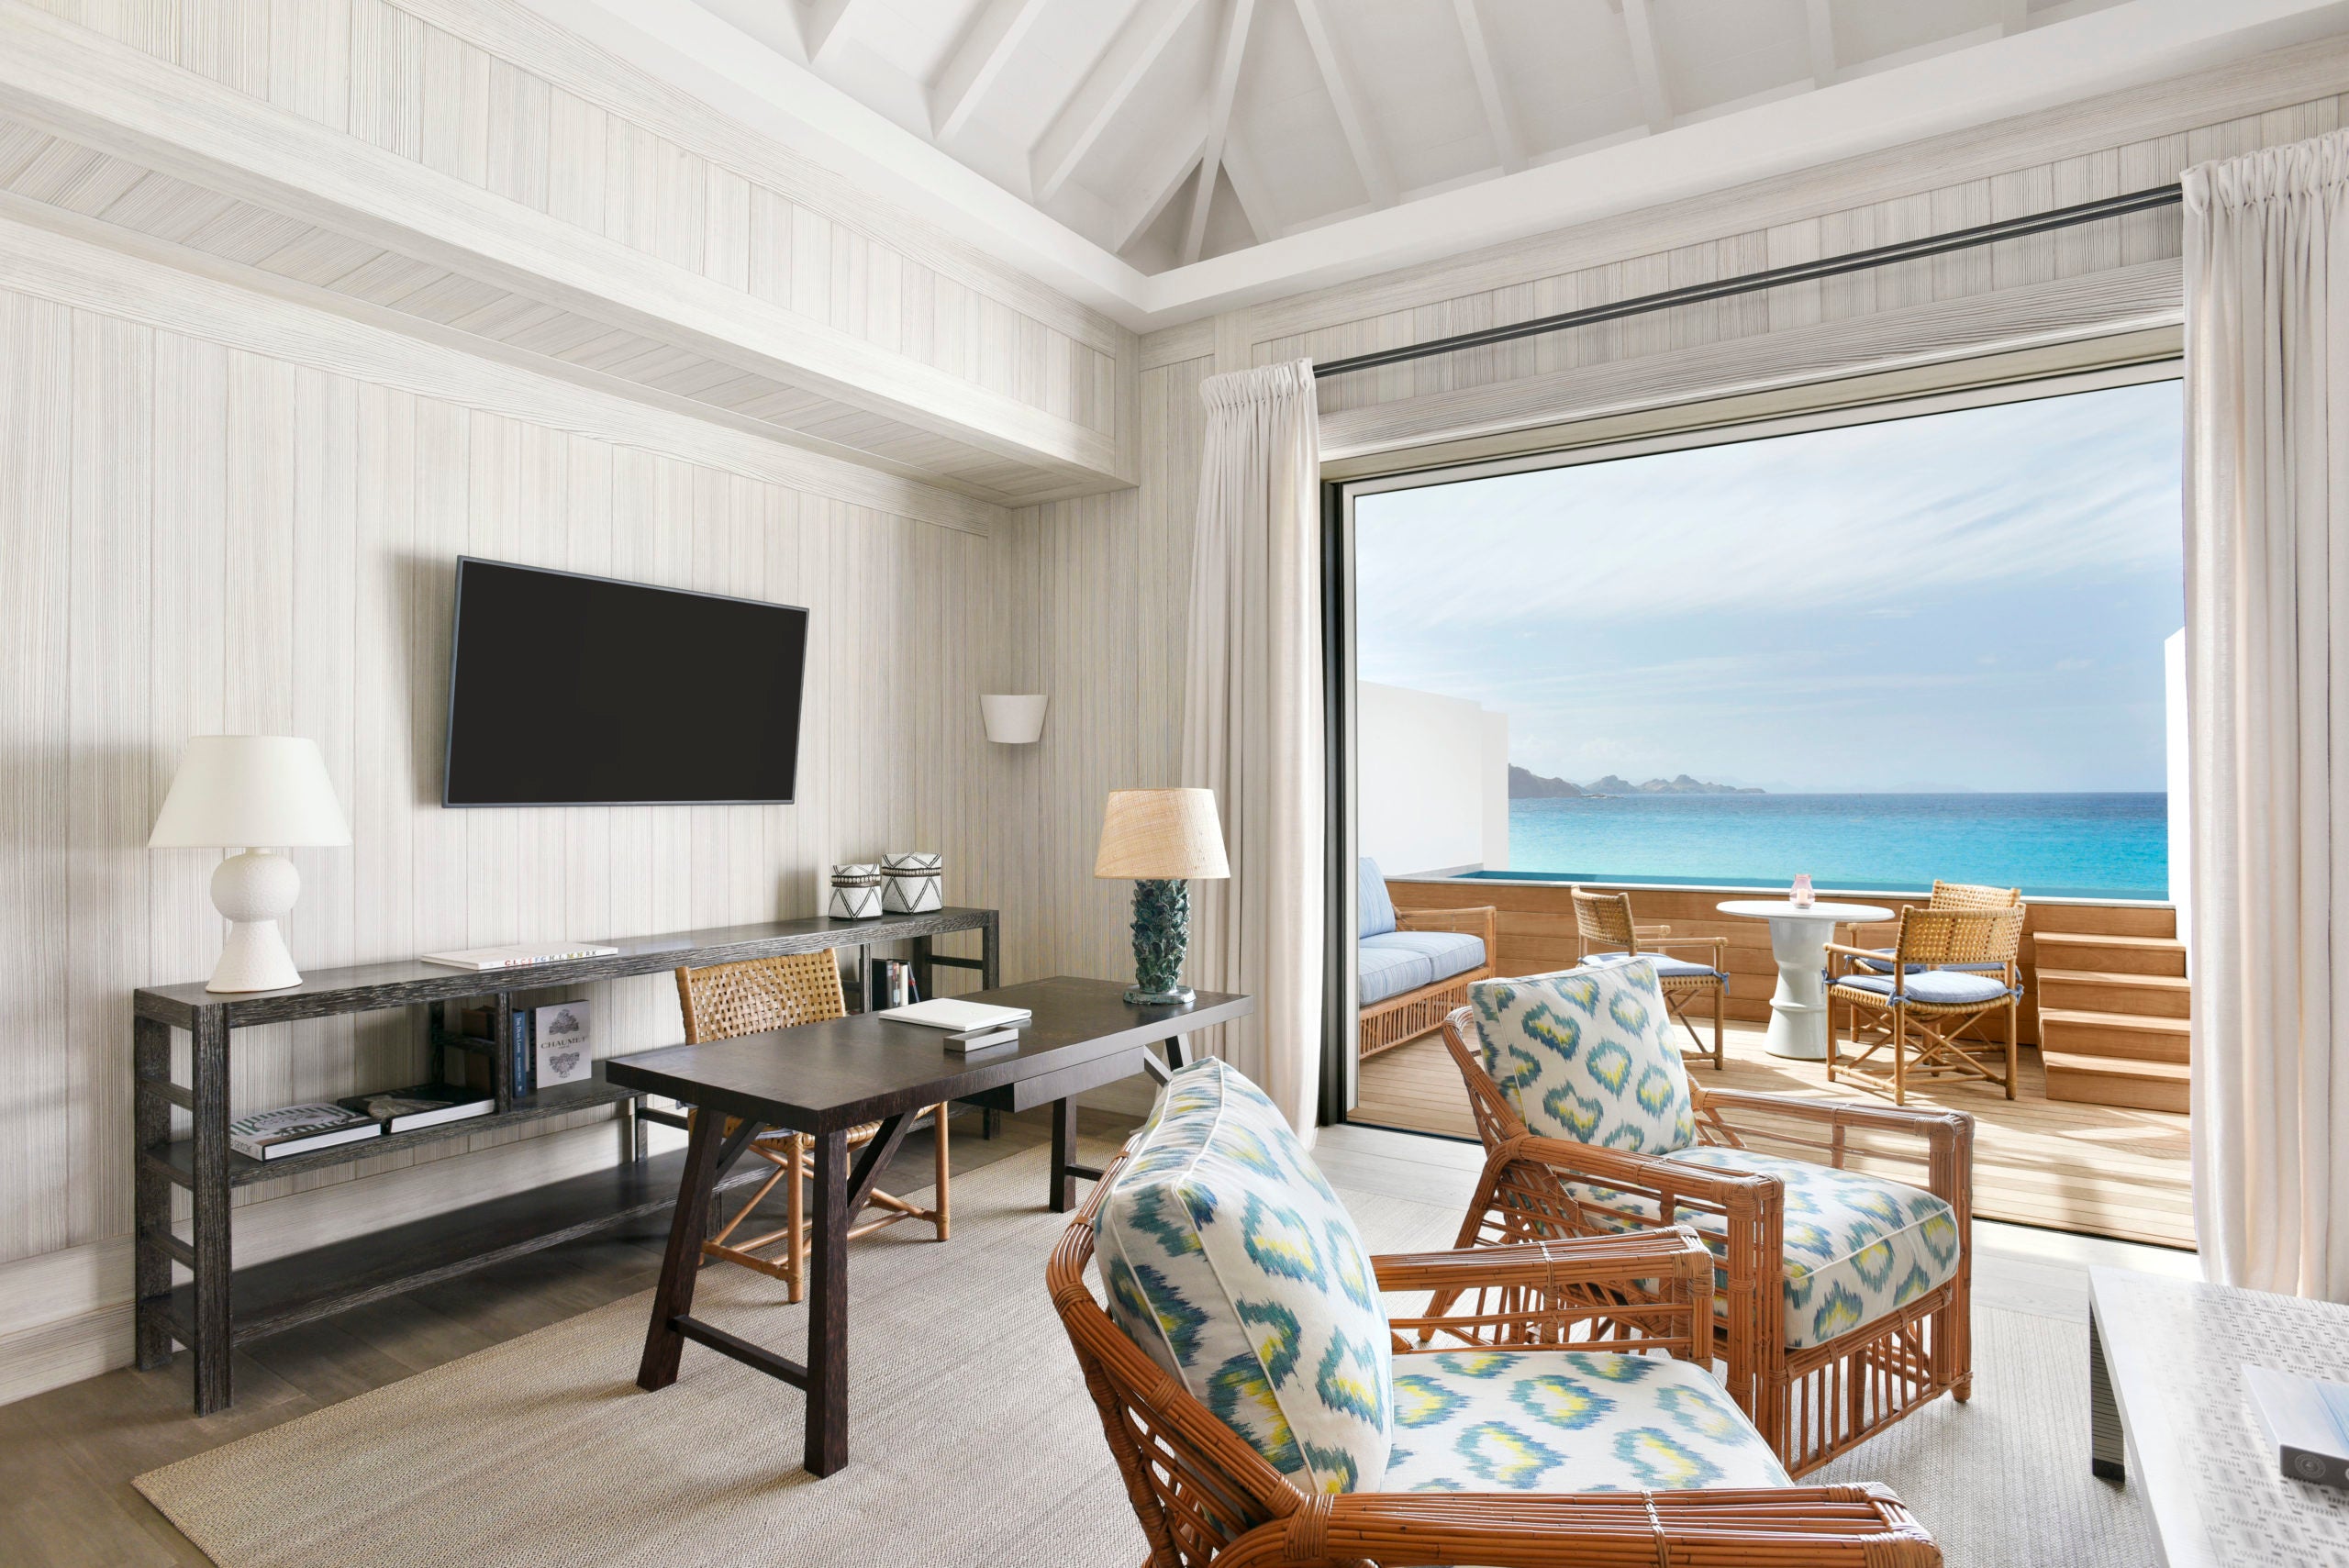 Cheval Blanc St-Barth to Reopen with New Design - Elite Traveler